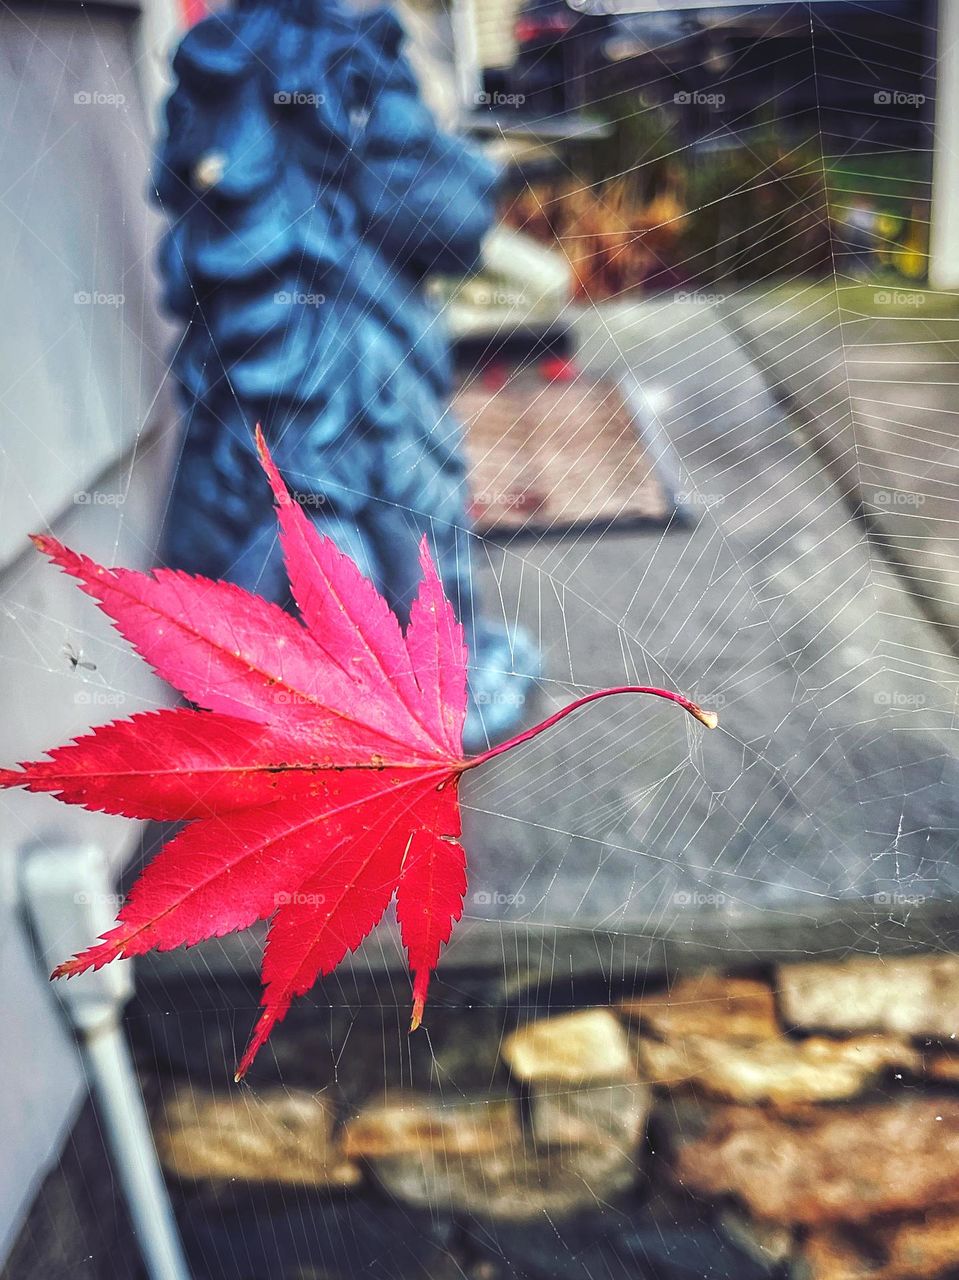 Leaf caught in a spiders web